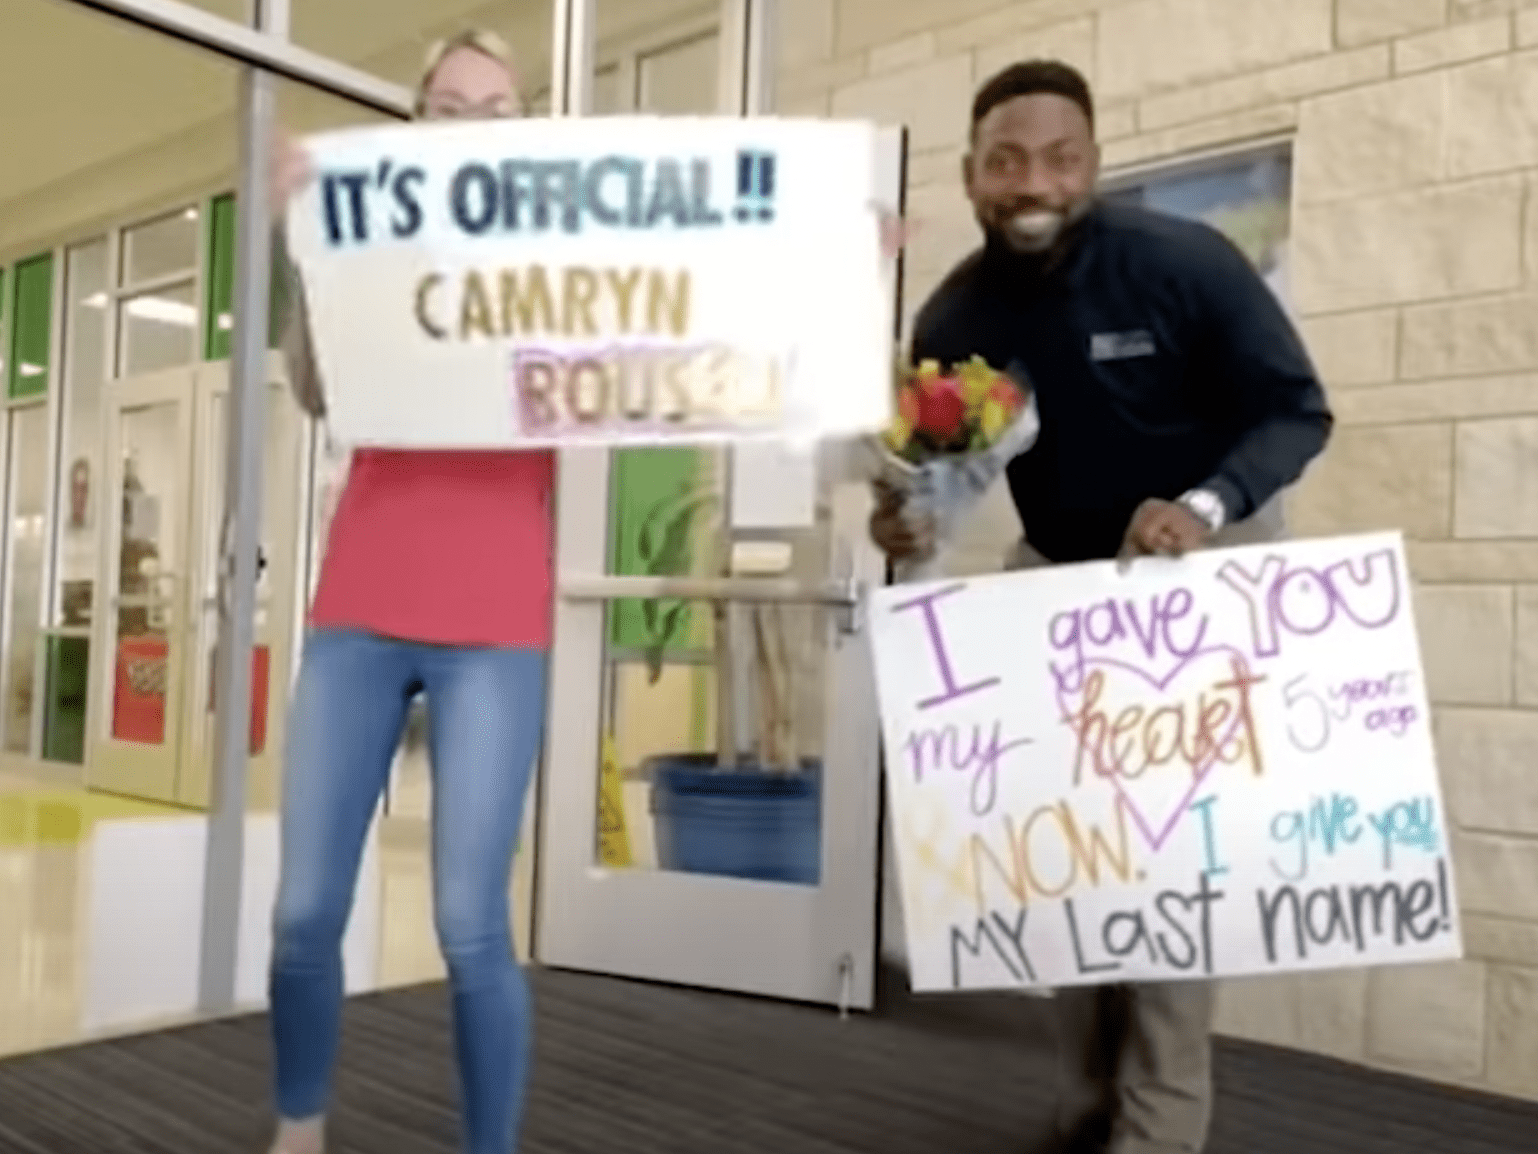 Sarah and Myke surprised Camryn at school holding signs. | Source: youtube.com/Good Morning America